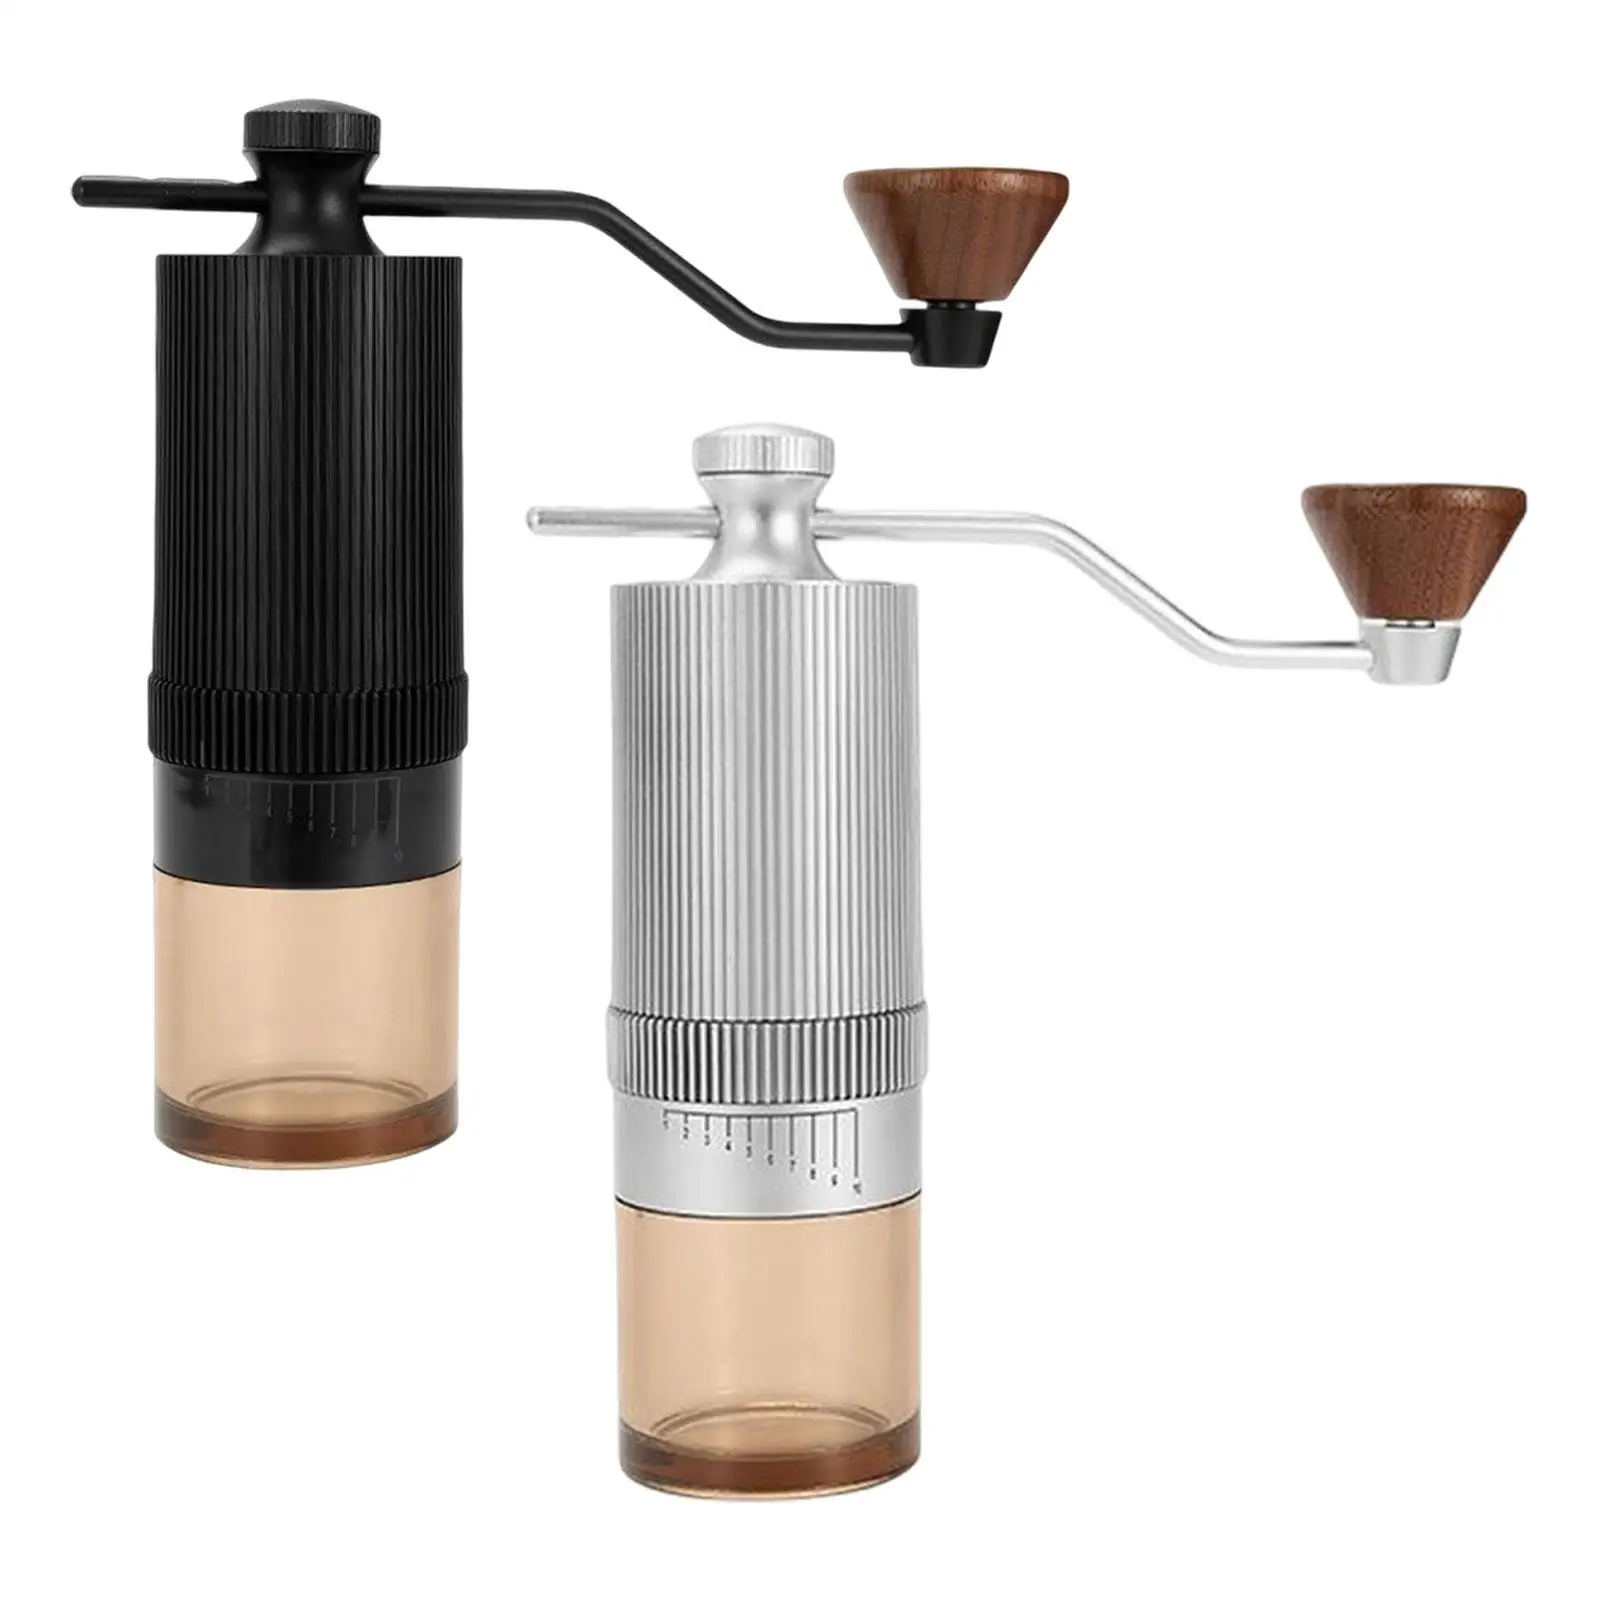 Portable Hand Crank Manual Coffee Grinder Conical Burr Coffee Mill with 420 Stainless Steel Burr for Espresso Gift Office Hiking